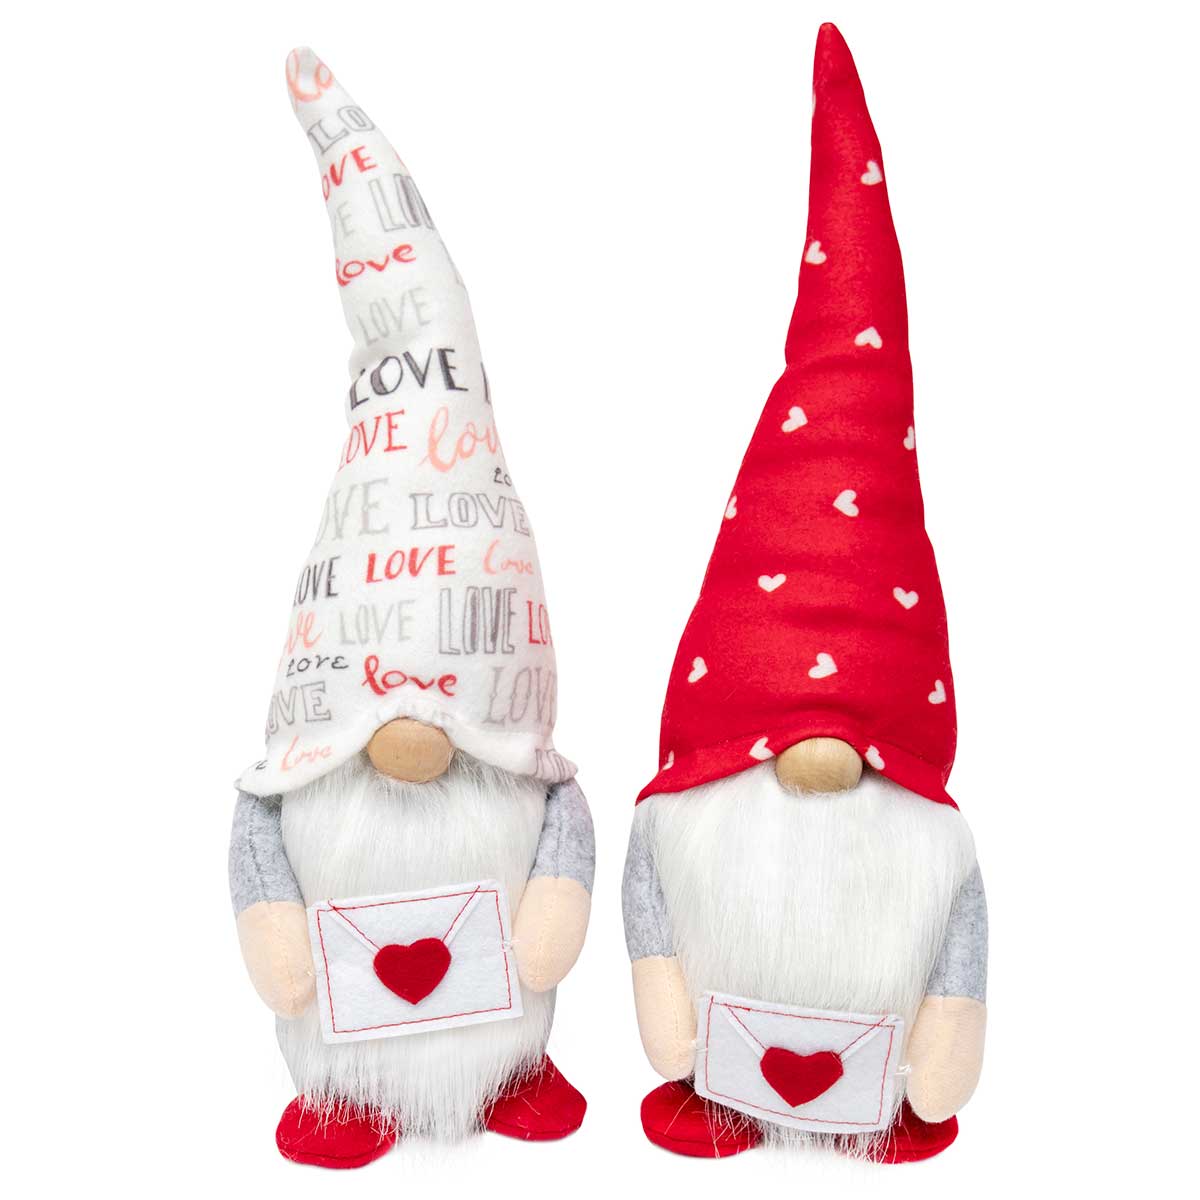 !Luv Gnome with Envelope, Wood Nose 14"